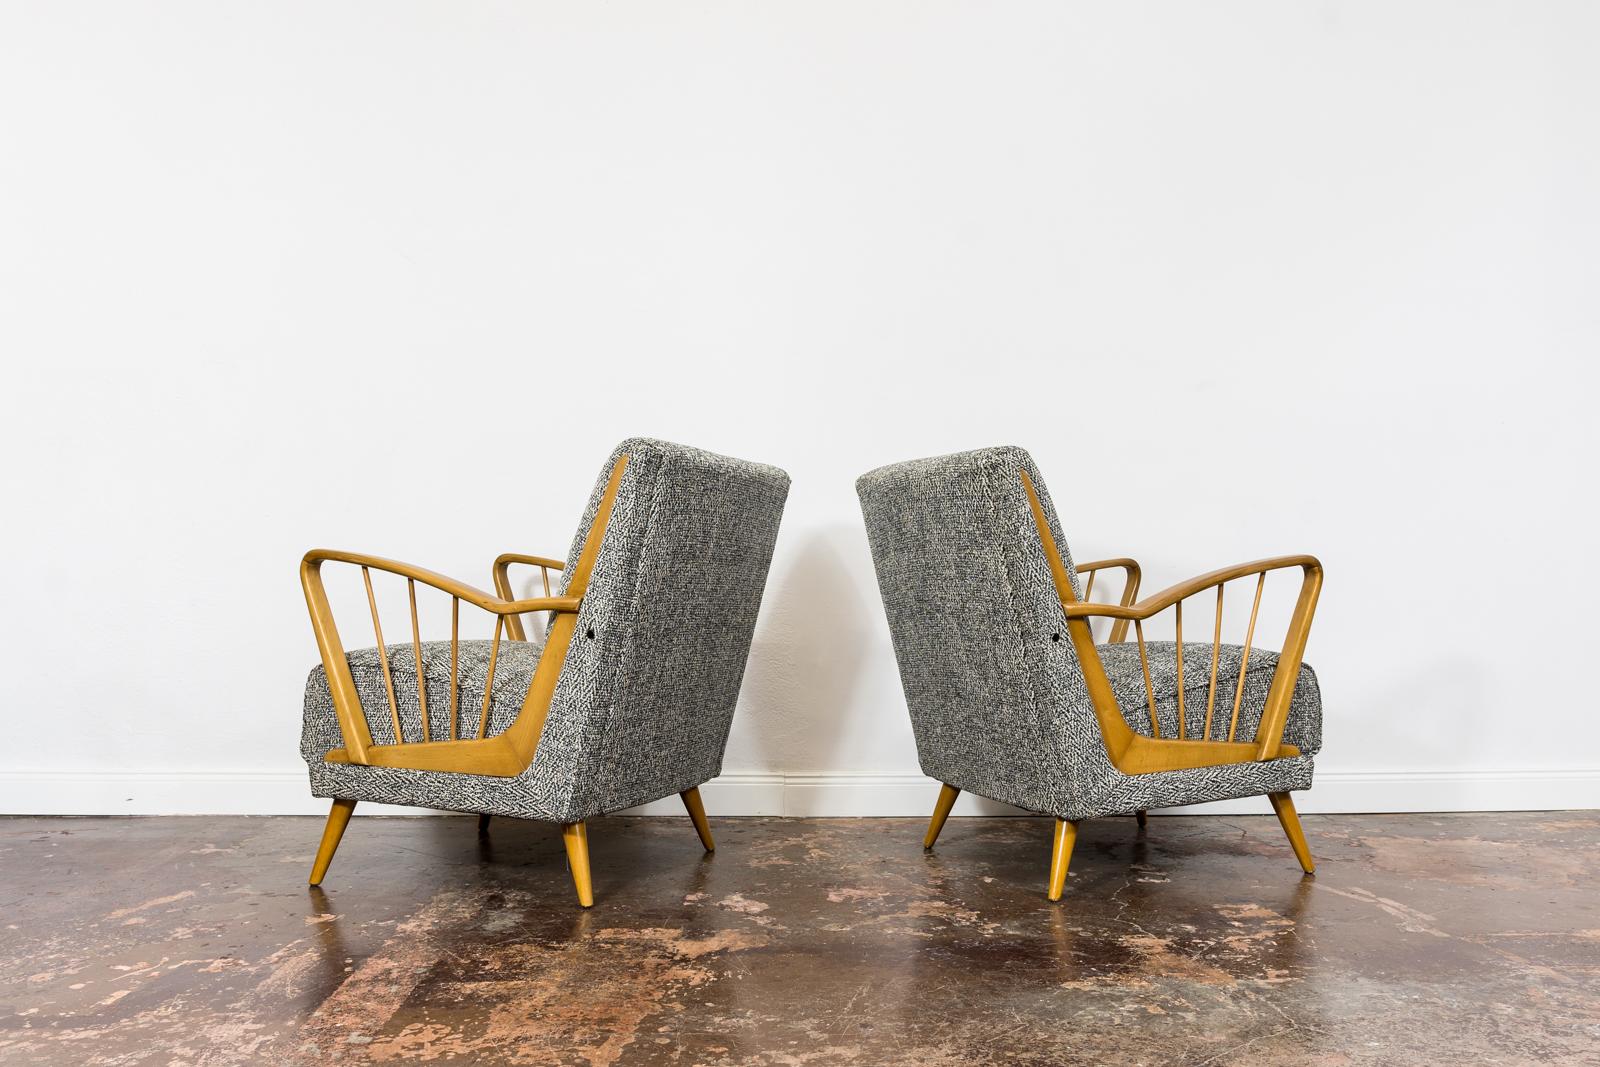 Wood Pair Of Mid-Century Armchairs, 1950's, Germany For Sale